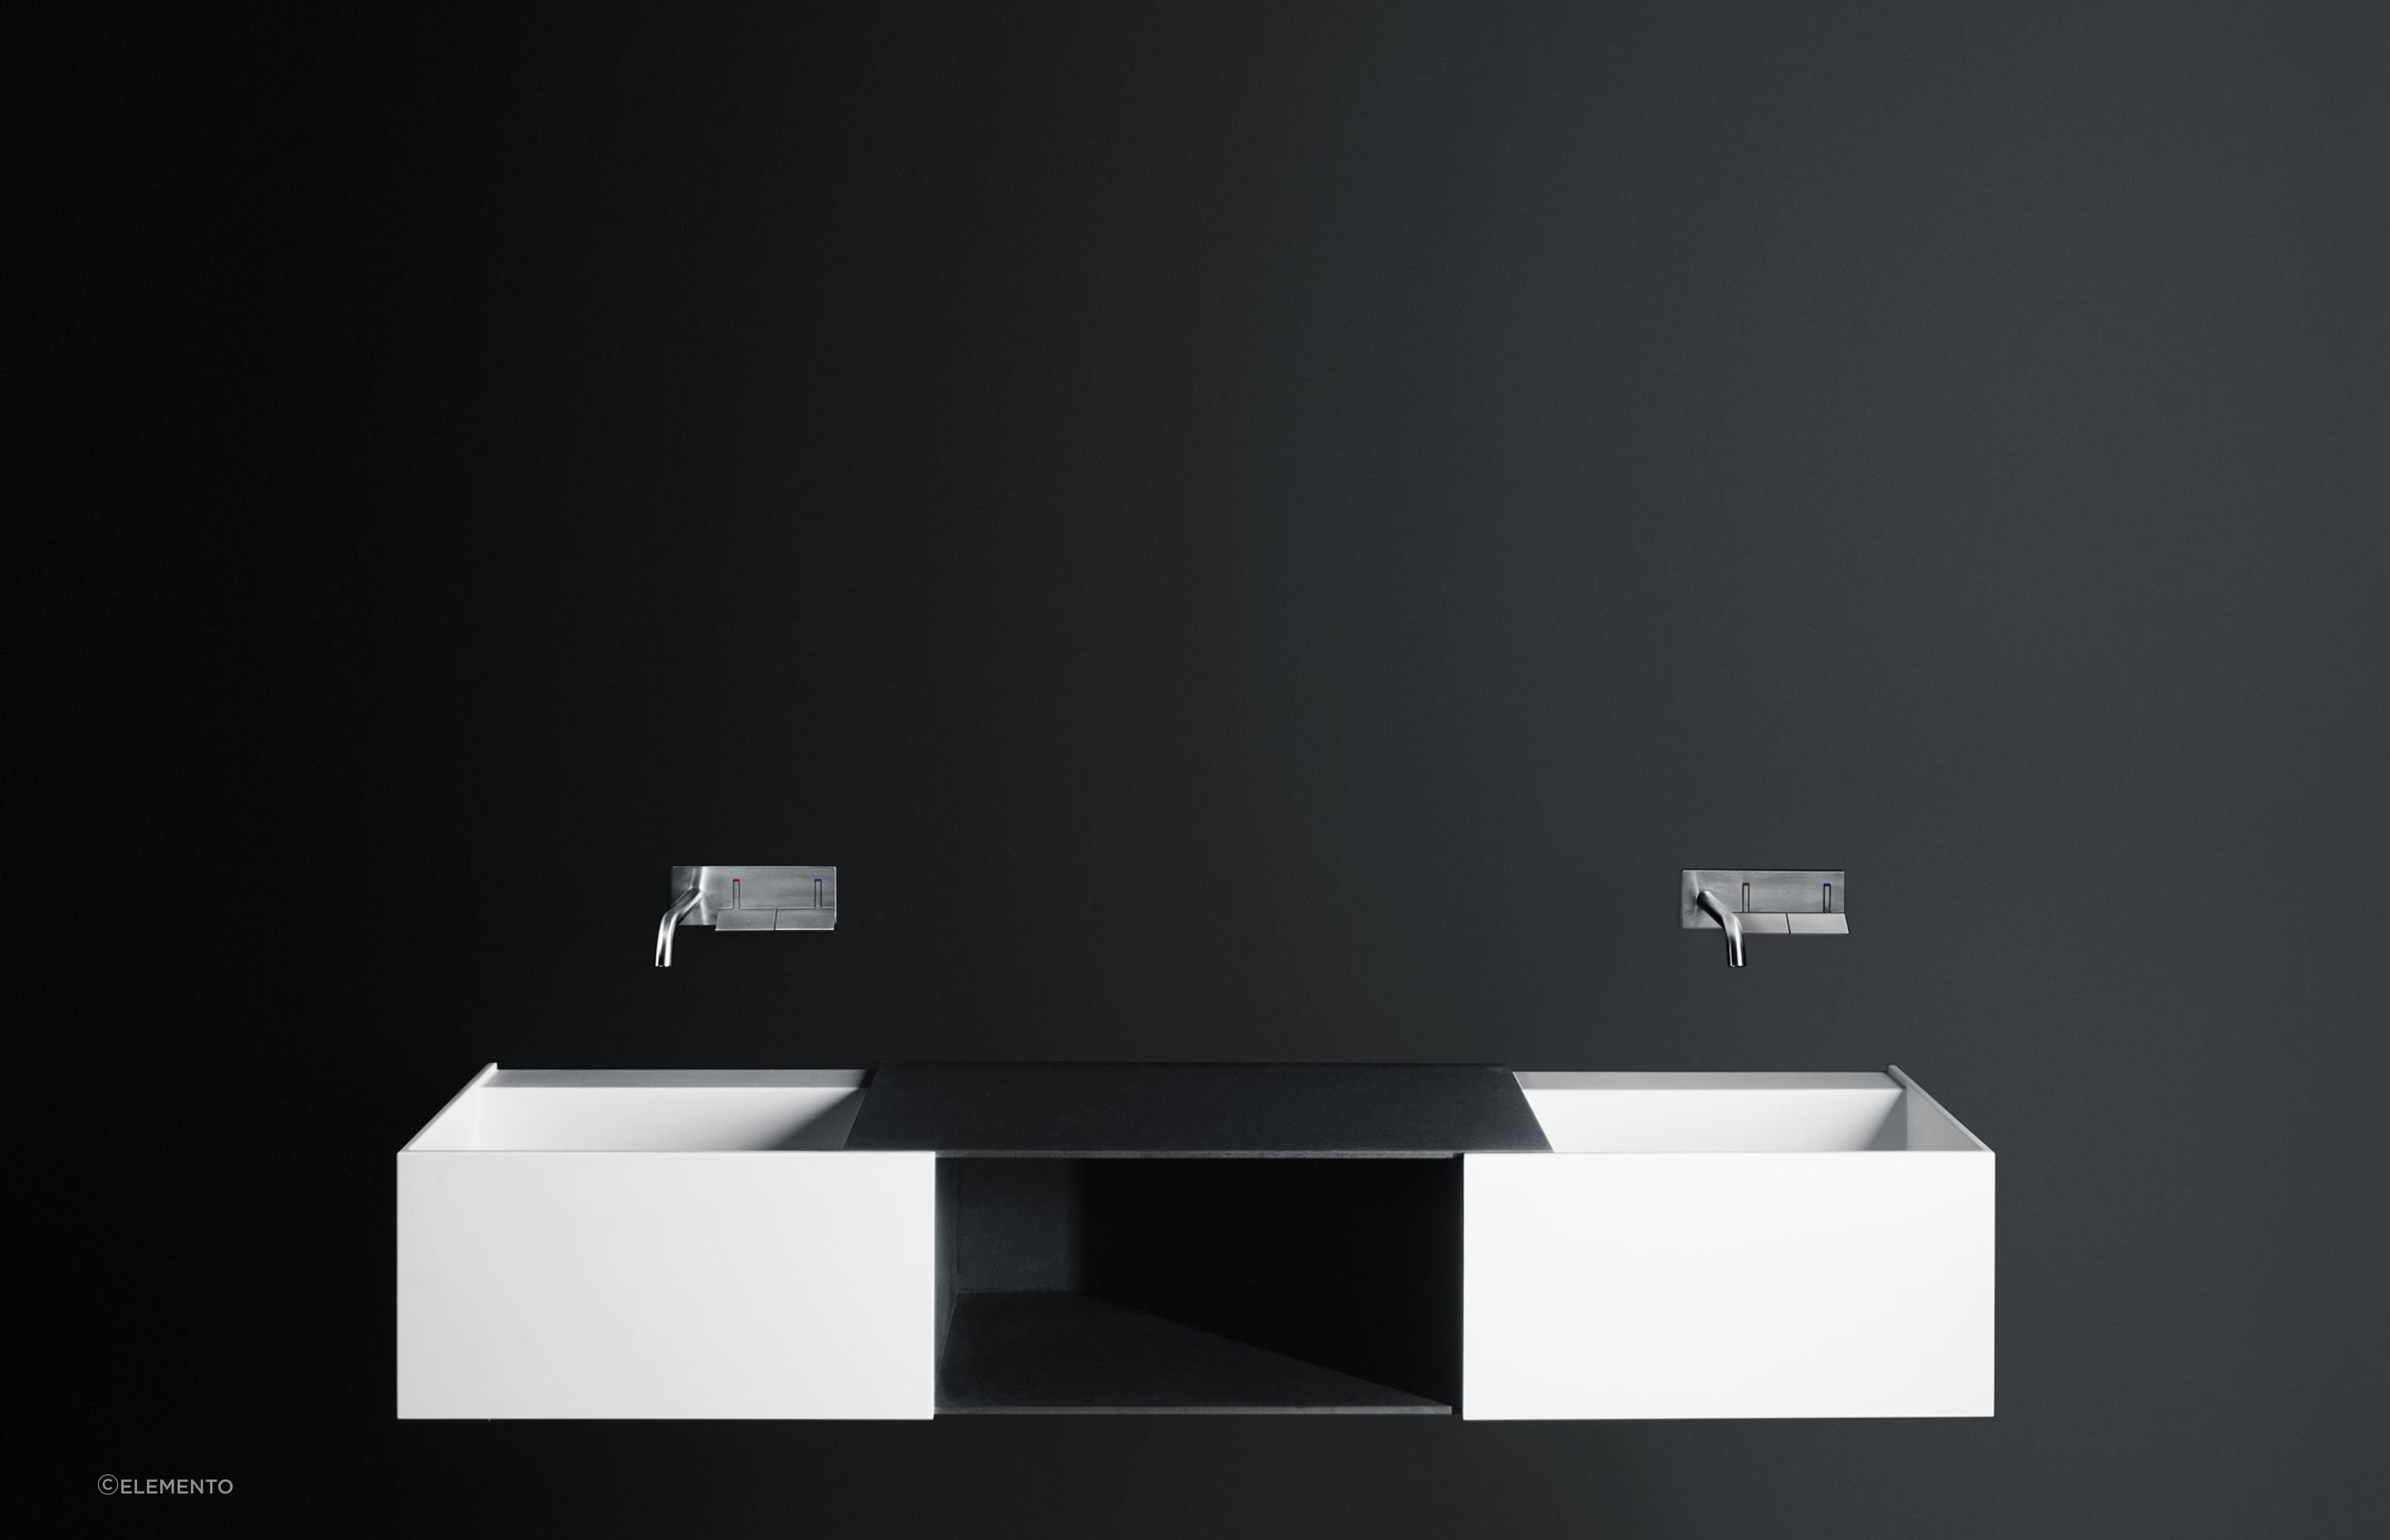 There's nothing more dynamic and timeless than black and white, seen here with the DueC Washbasin.